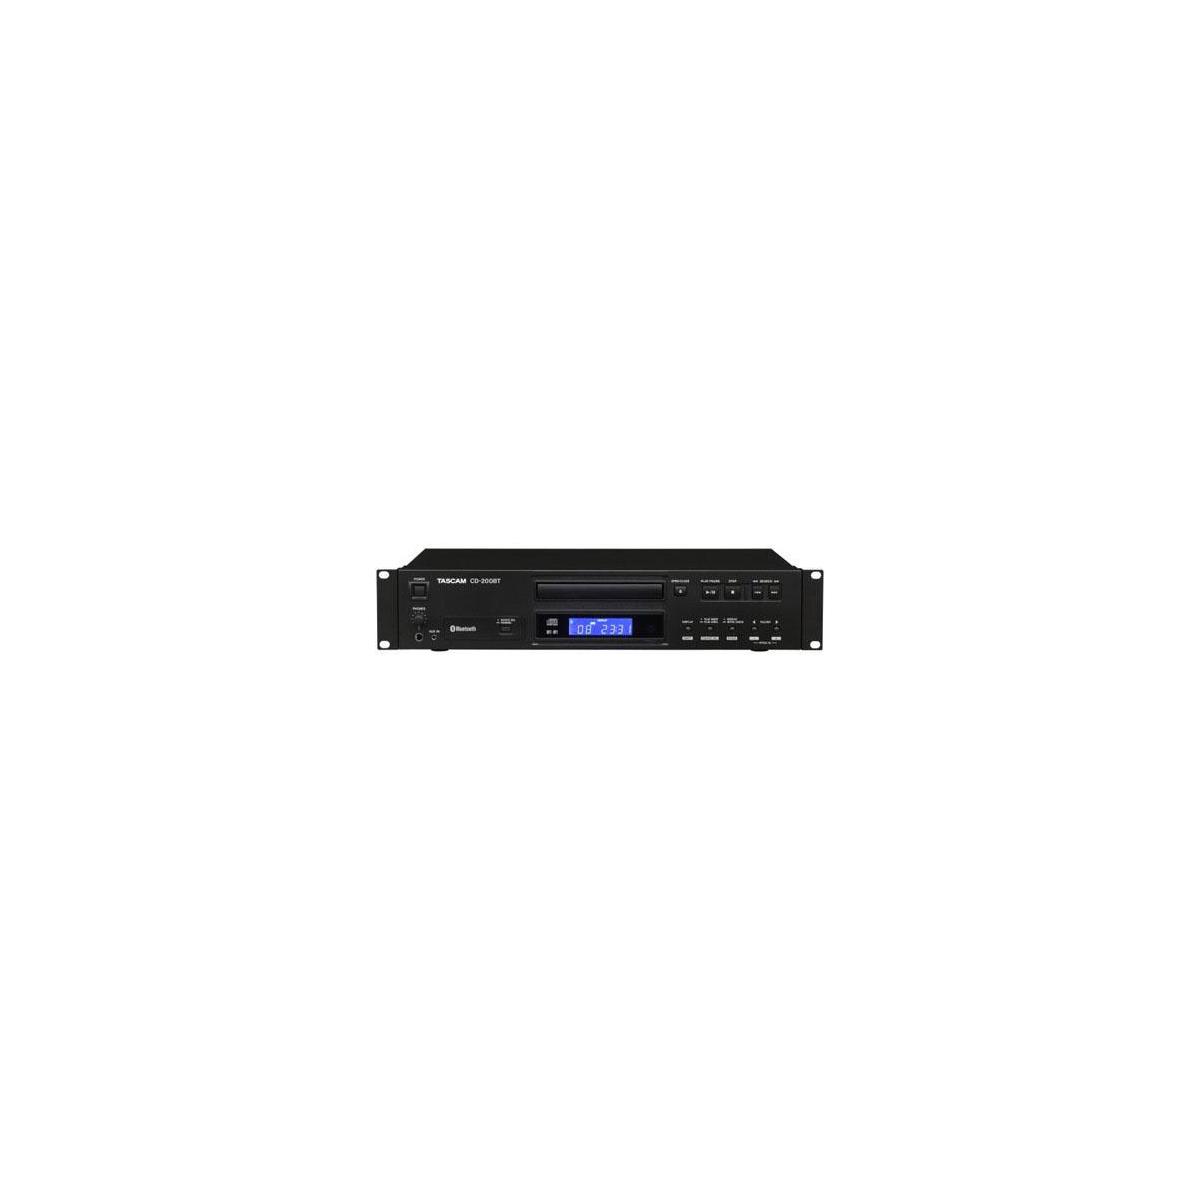 Image of Tascam CD-200BT Rackmount CD Player with Bluetooth Receiver